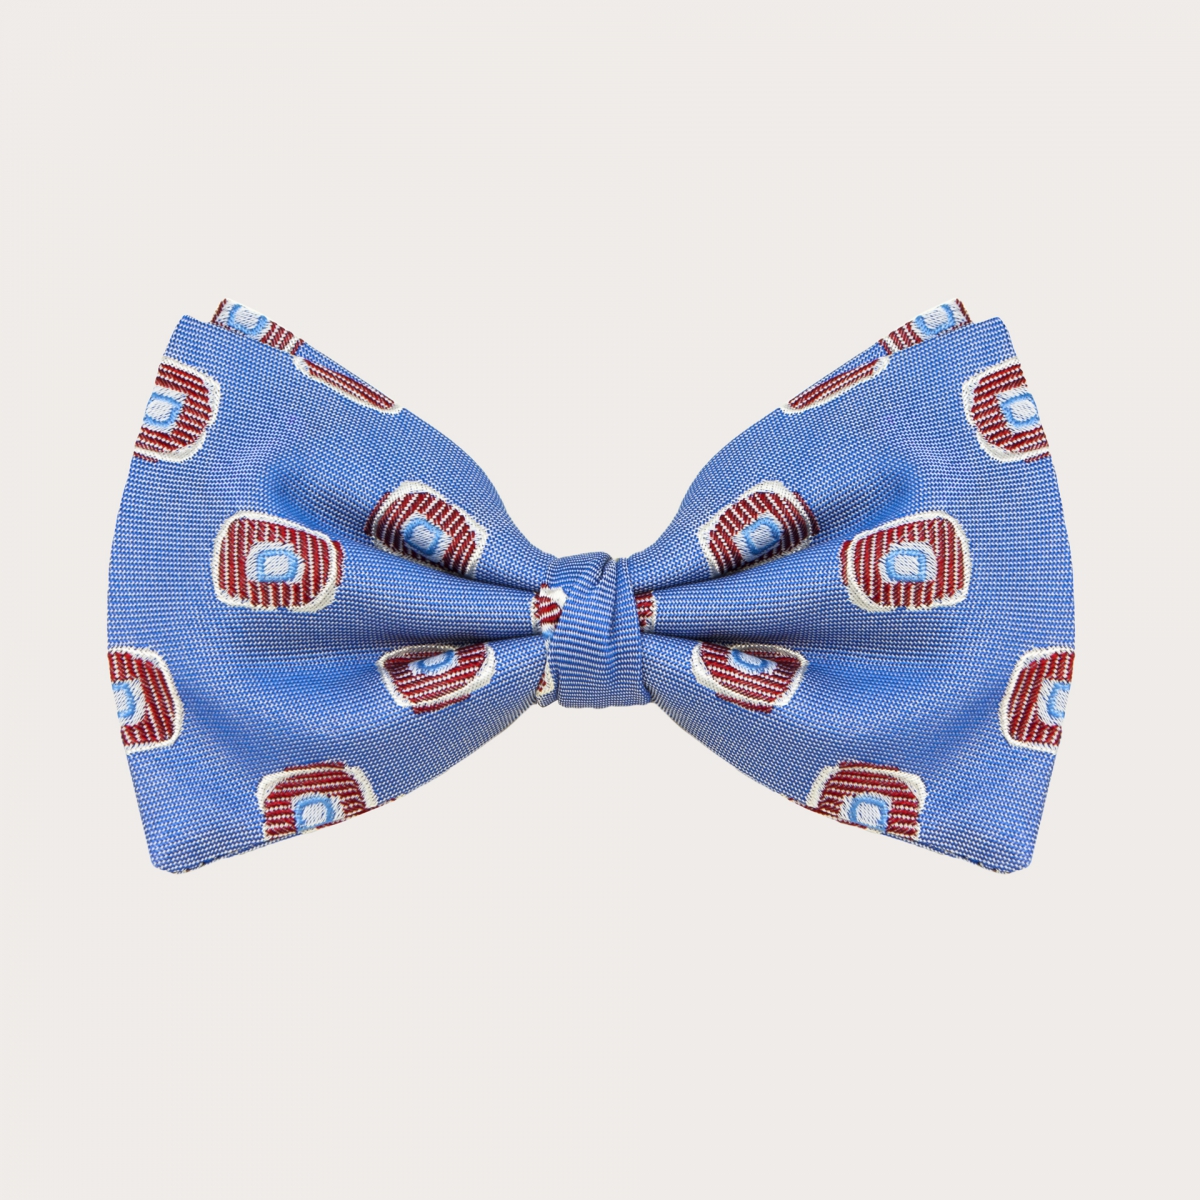 Bow tie in jacquard silk, blue with red geometric pattern